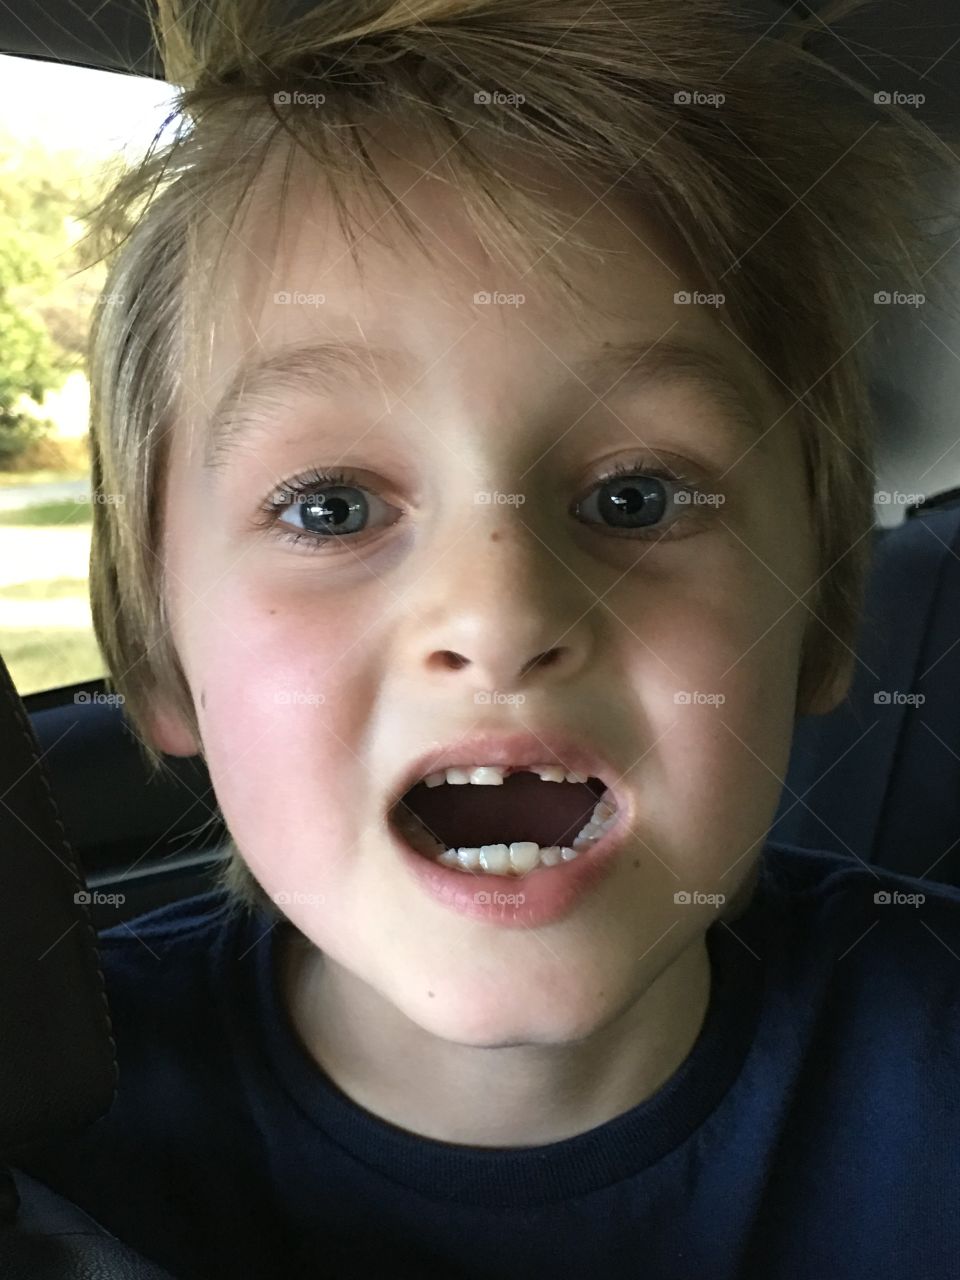 Lost a tooth!